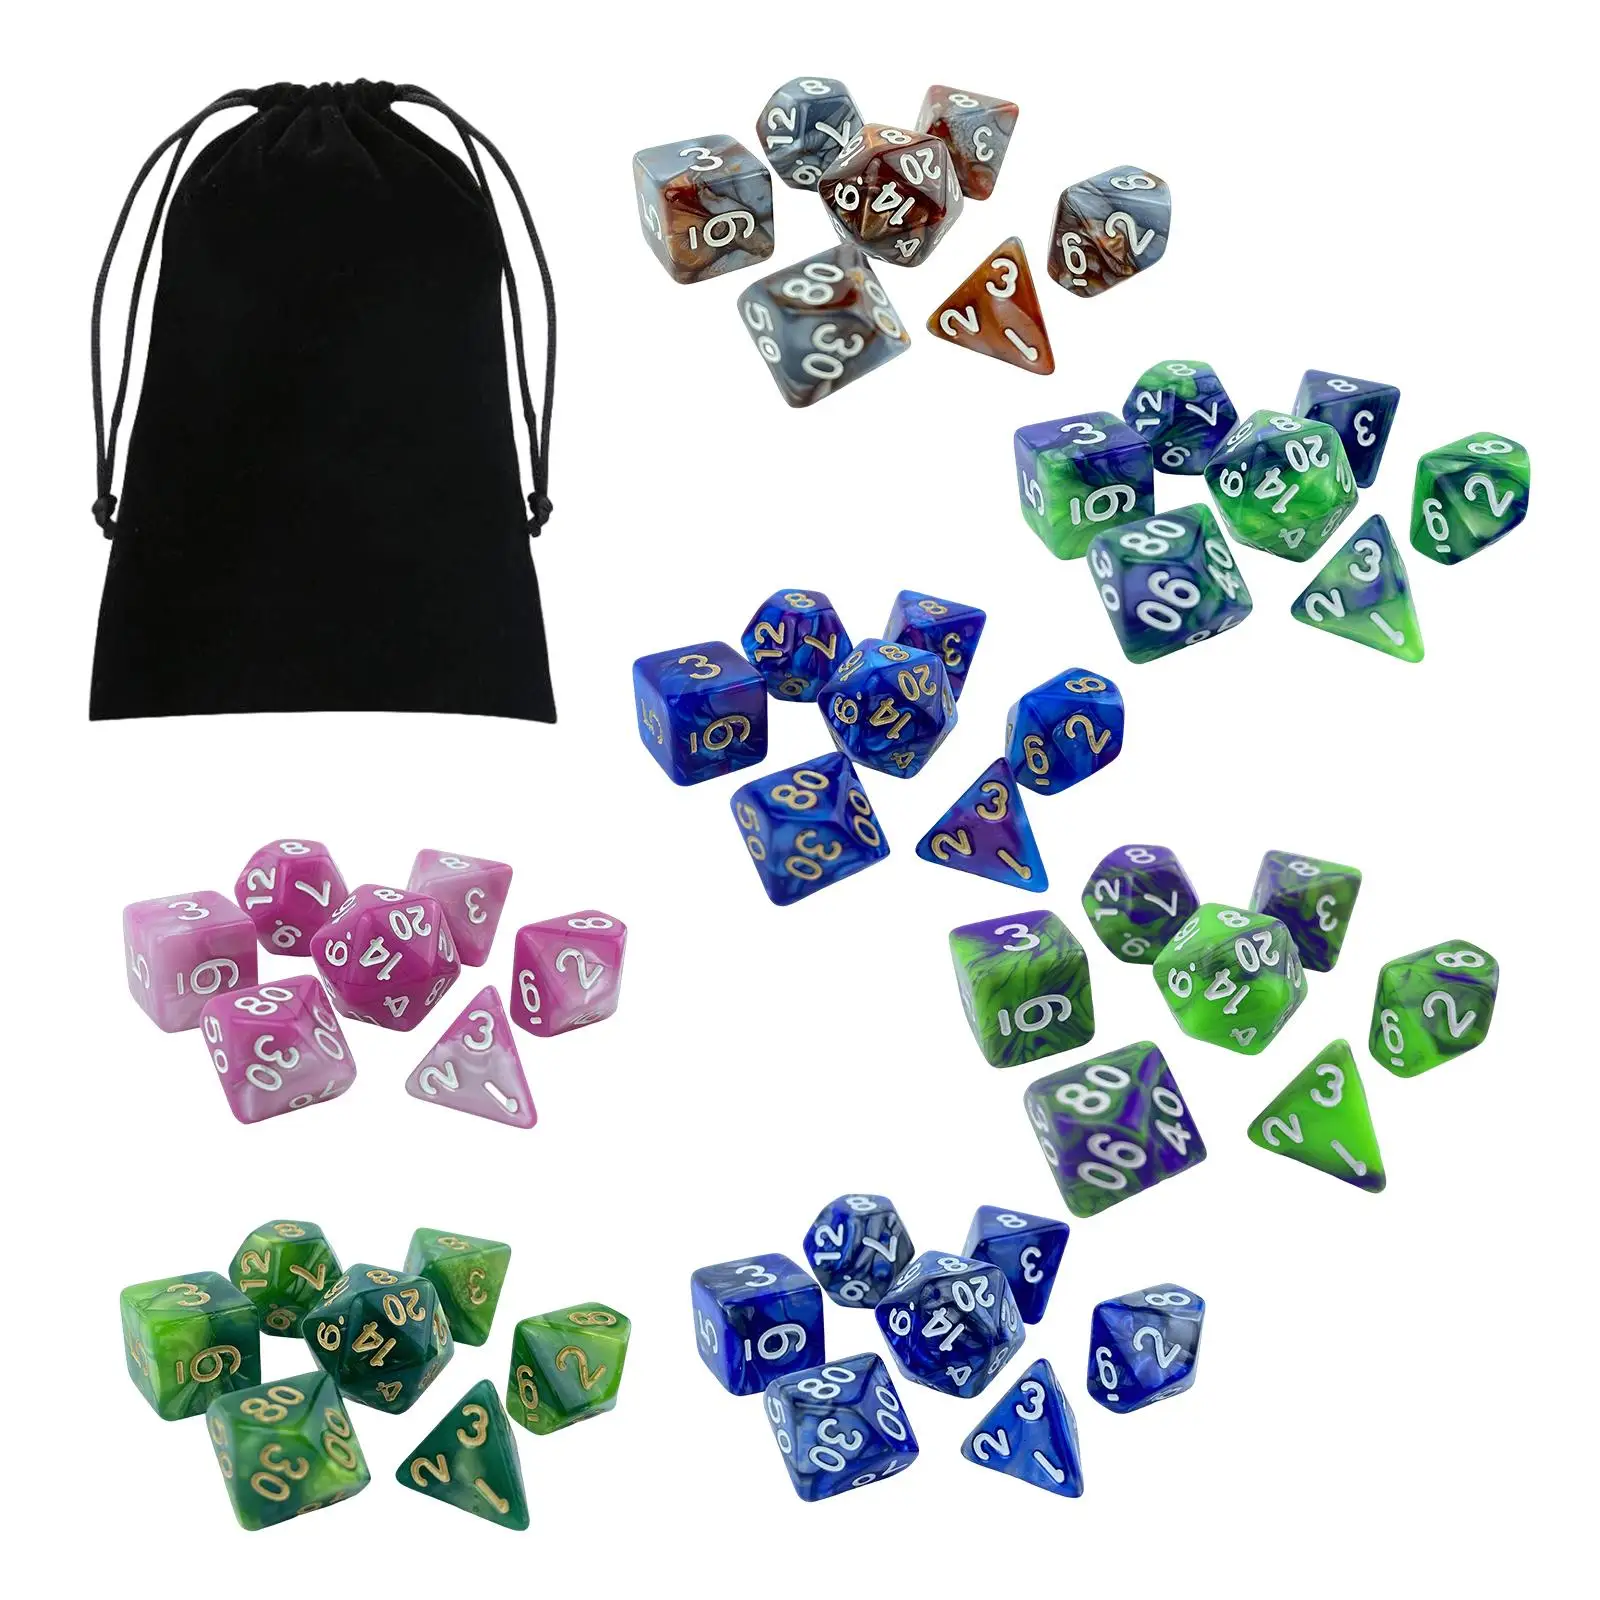 49x Acrylic Polyhedral Dices Set with Storage Bag D8 D10 D12 D20 Toys Math Teaching Rolling Dices for Table Games Parties KTV